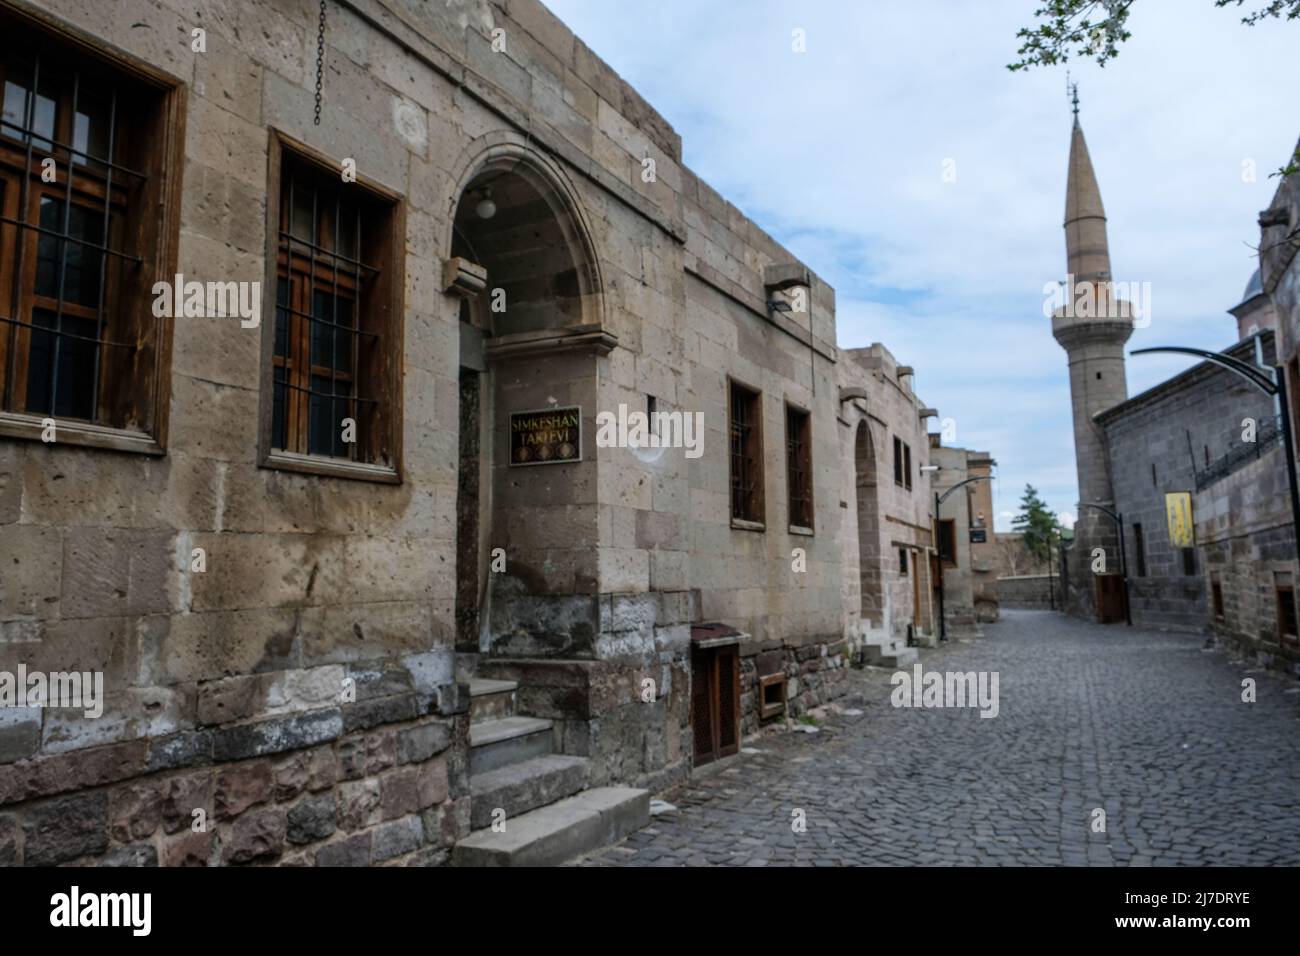 The Ottoman street with traditional buildings in Kayseri Talas attracts tourists with its shops. visit date 15.04.2022. Stock Photo